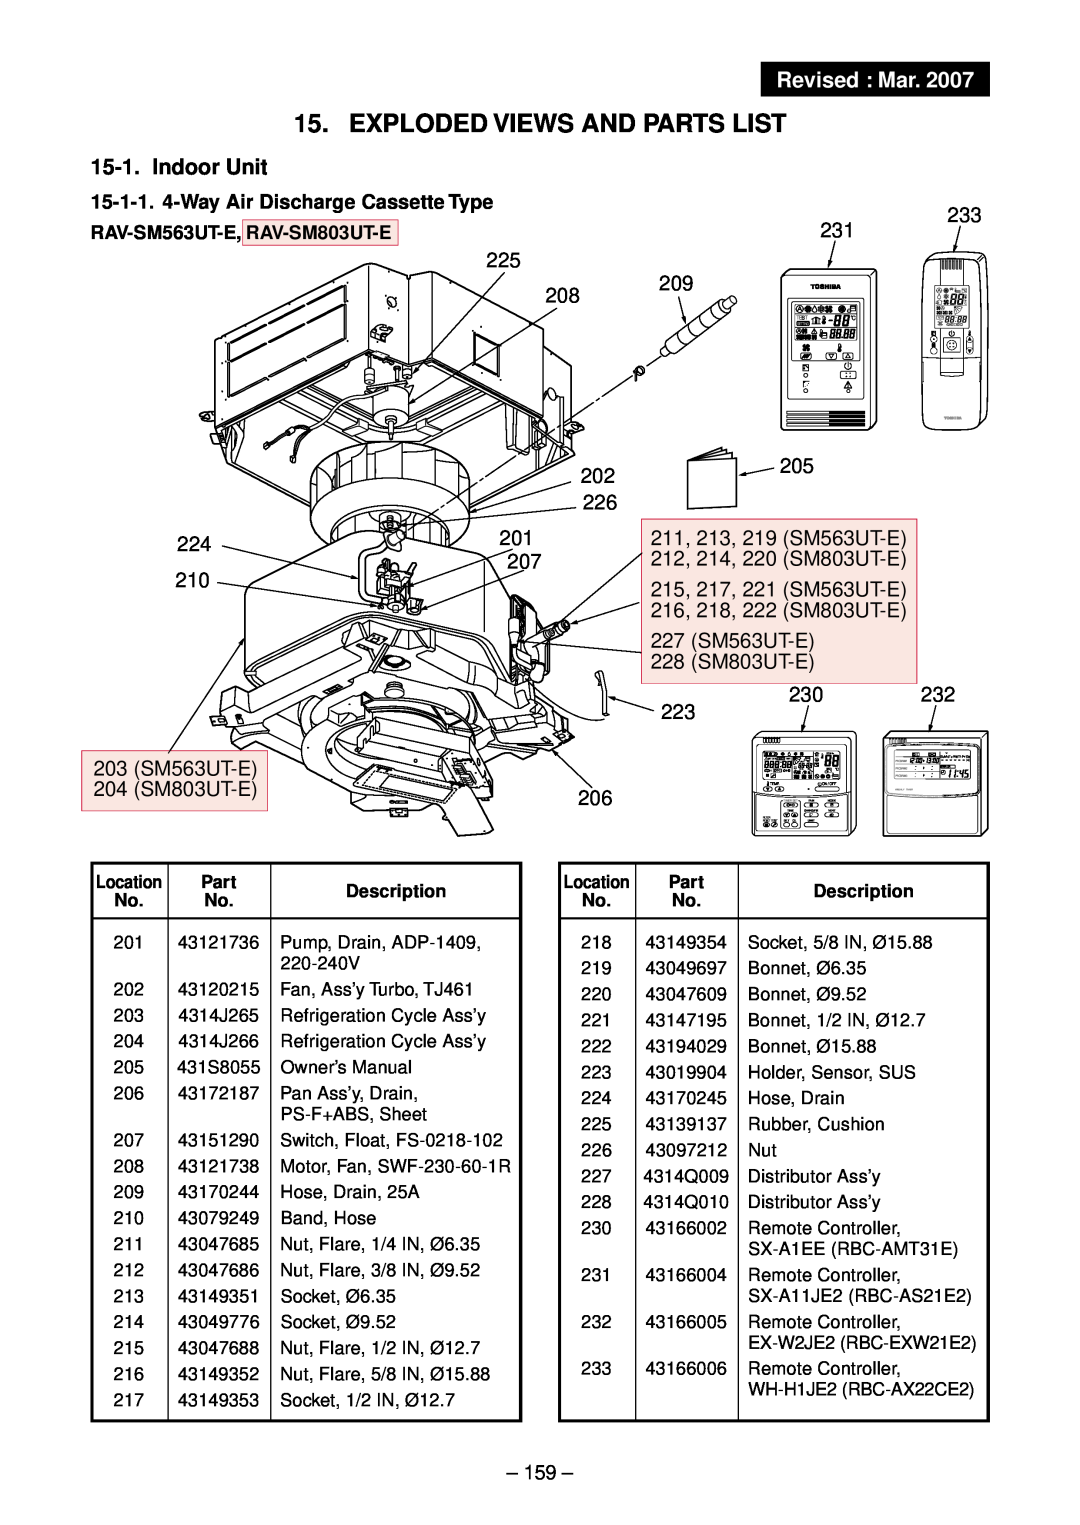 Toshiba RAV-SM1402BT-E Exploded Views And Parts List, Revised Mar, Indoor Unit, 15-1-1. 4-Way Air Discharge Cassette Type 